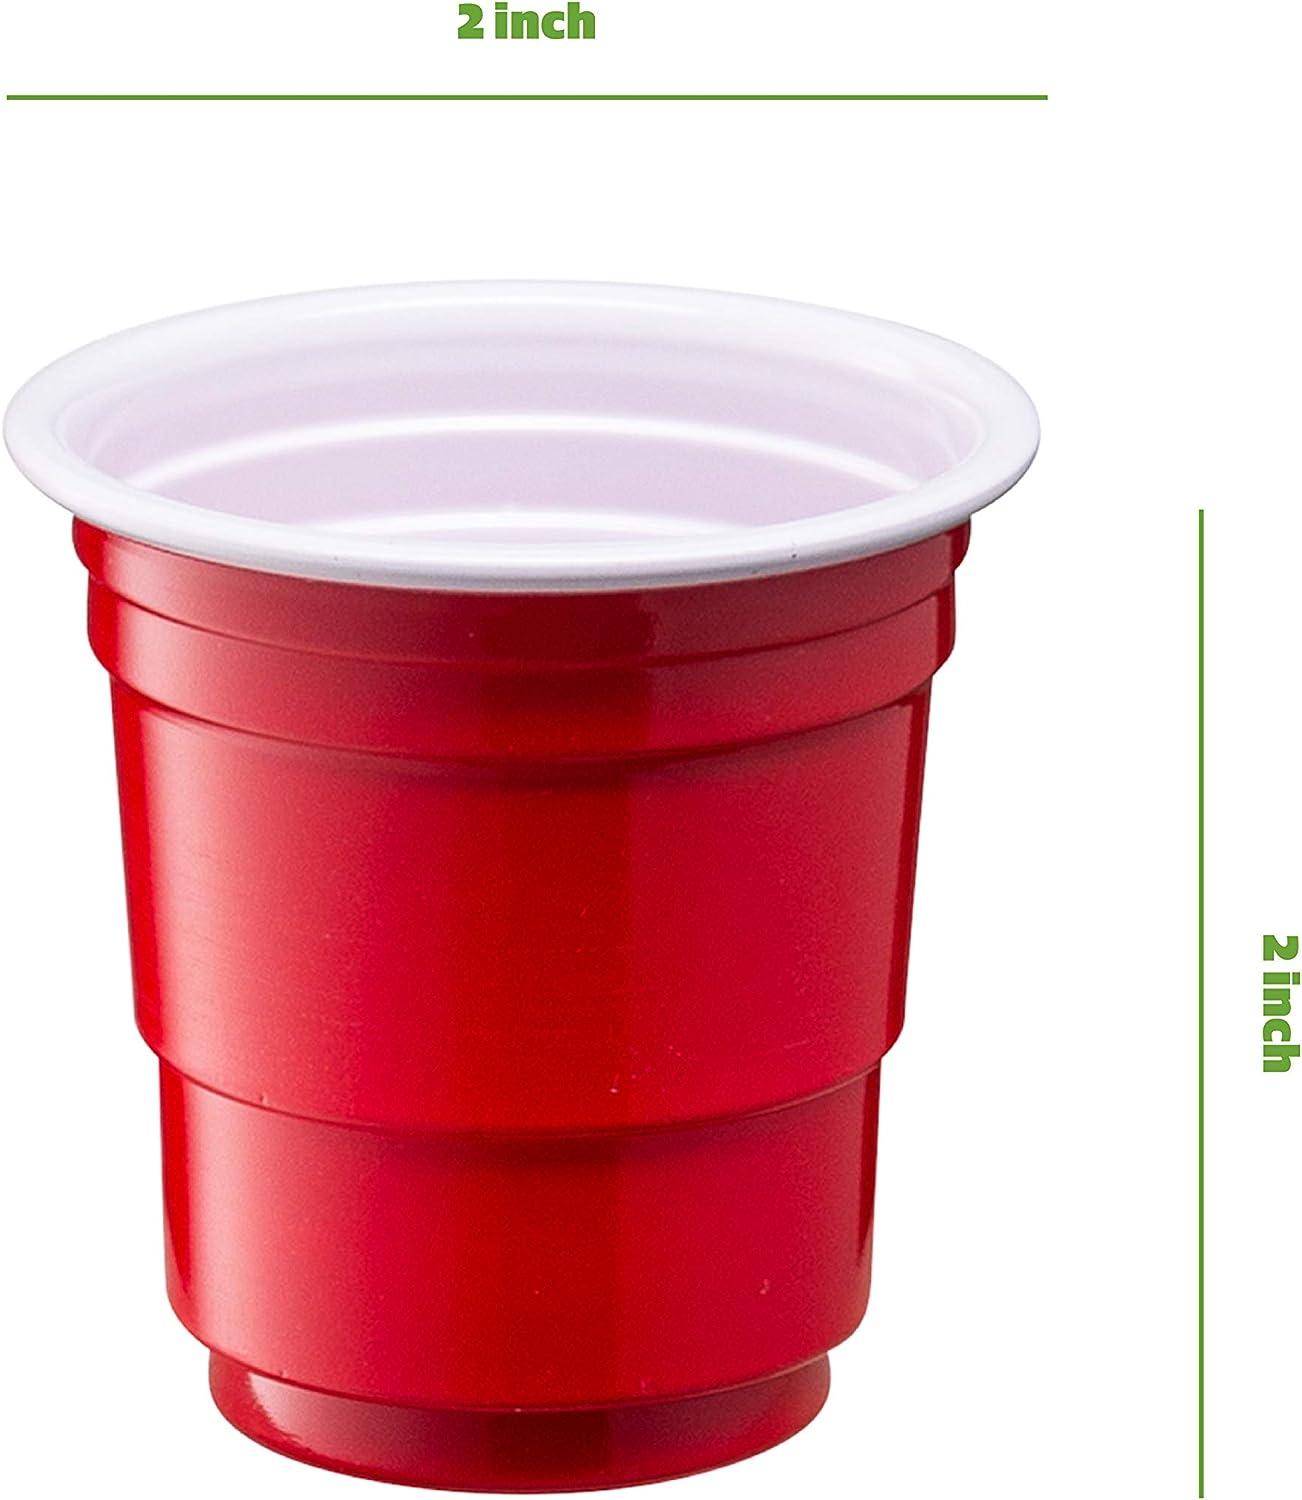 Disposable Party Plastic Cups - Red Drinking (12 12 oz., 240 Count